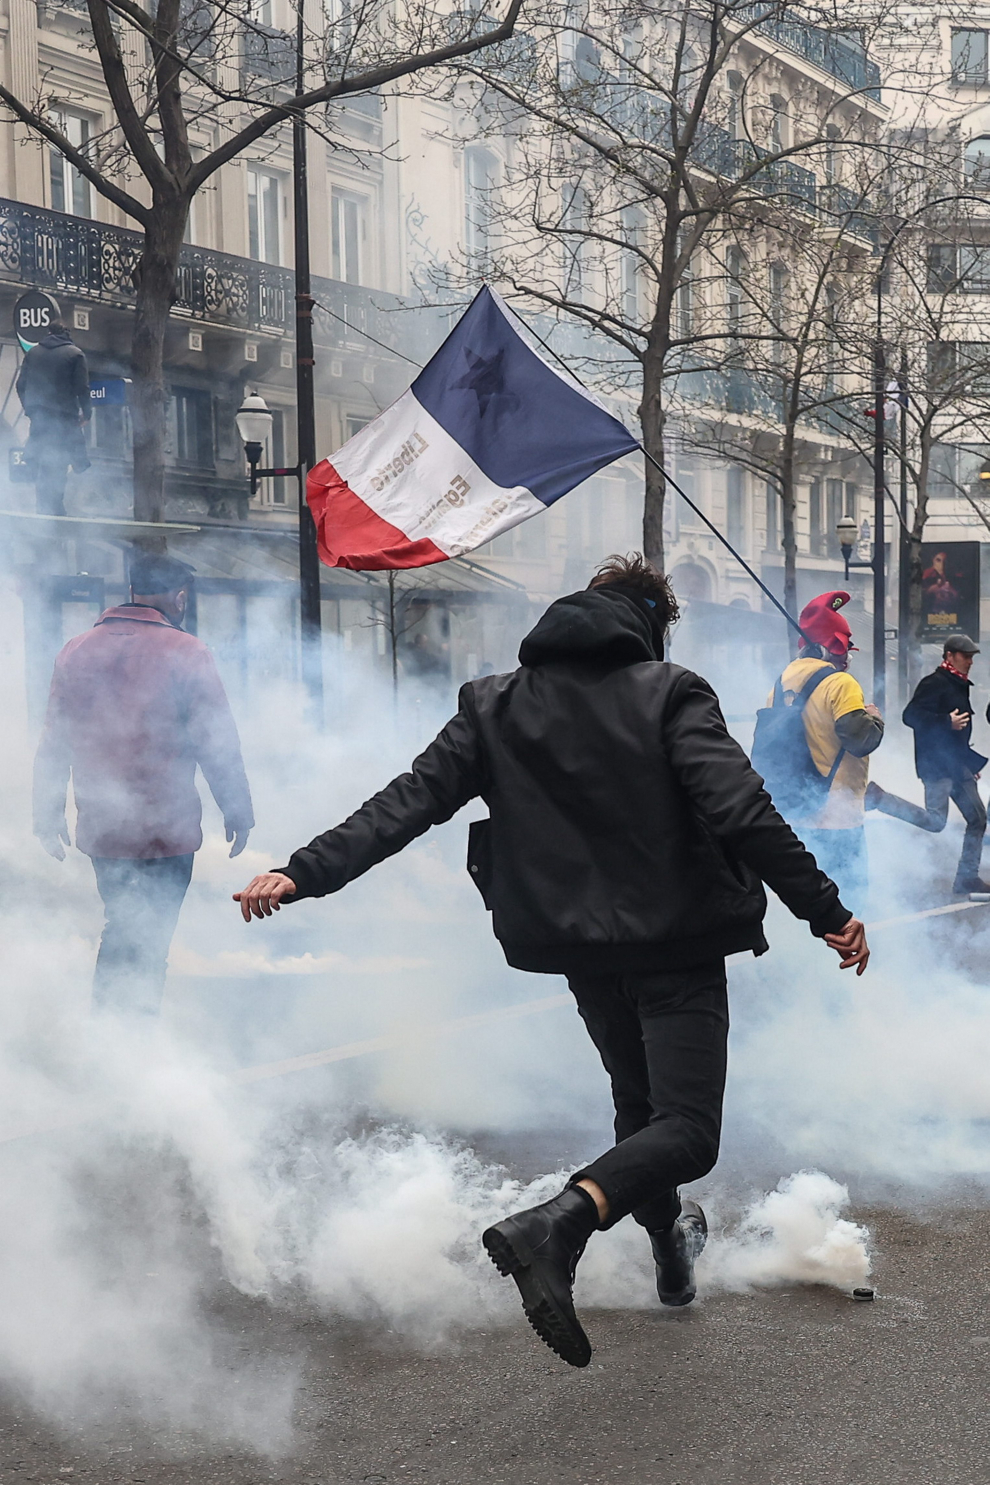 Paris (France), 23/03/2023.- A protester stands in tear gas fumes during clashes with anti-riot police during a demonstration against the government pension reform in Paris, France, 23 March 2023. Protests continue in France after the French prime minister announced on 16 March 2023 the use of Article 49 paragraph 3 (49.3) of the French Constitution to have the text on the controversial pension reform law be definitively adopted without a vote in the National Assembly (lower house of parliament). The bill would raise the retirement age in France from 62 to 64 by 2030. (Protestas, Francia) EFE/EPA/MOHAMMED BADRA
 FRANCE PENSIONS PROTEST